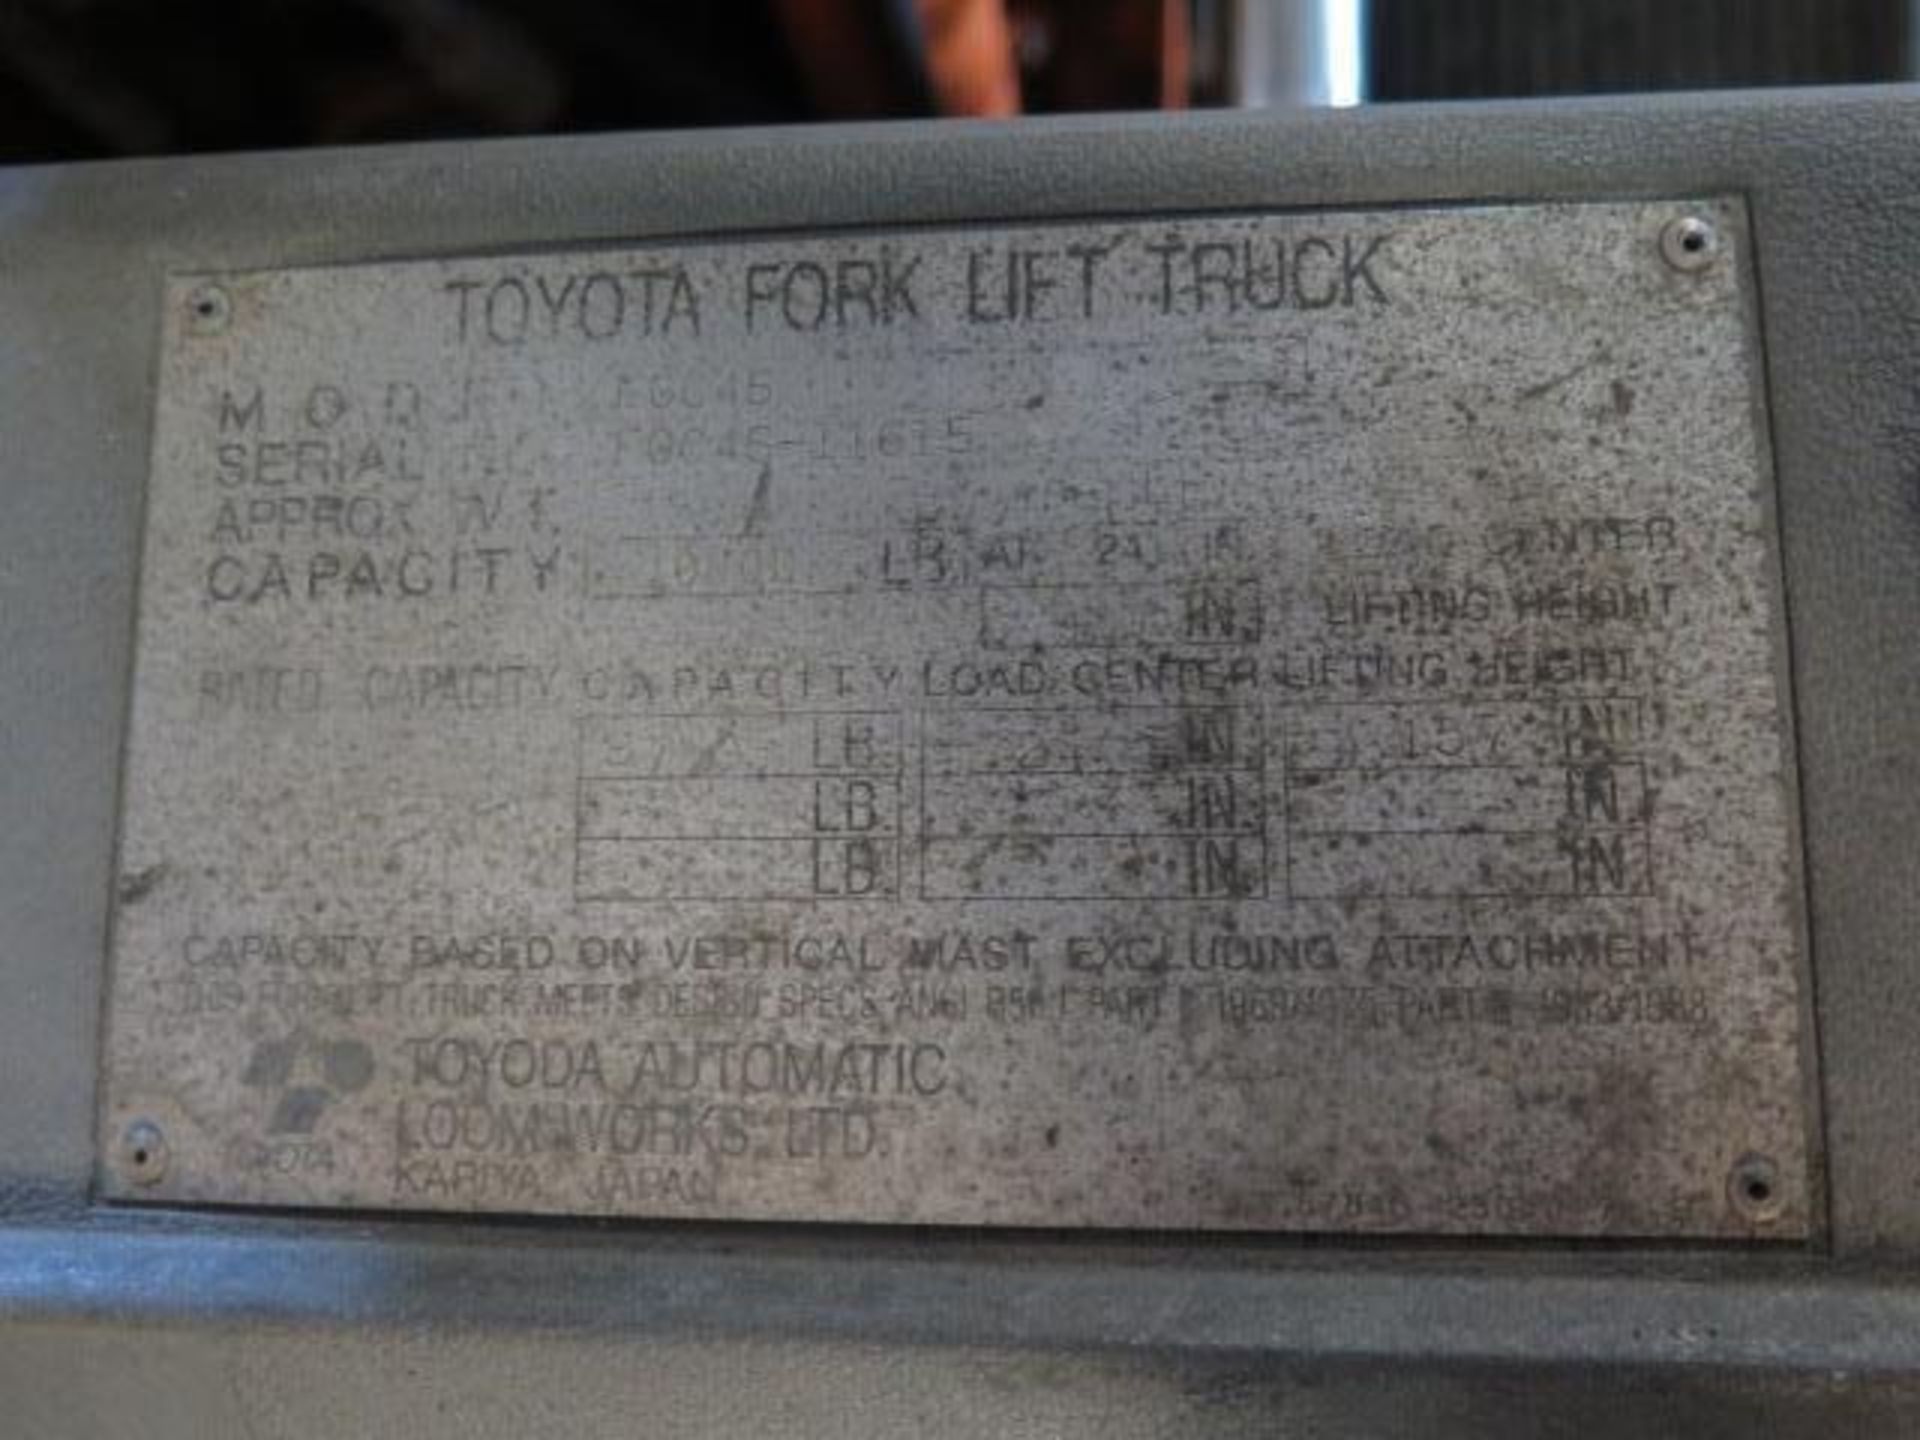 Toyota FGC45 10,000 Lb Cap LPG Forklift s/n FGC45-11615 w/ 3-Stage Mast, 157" Lift Height, Side - Image 10 of 10